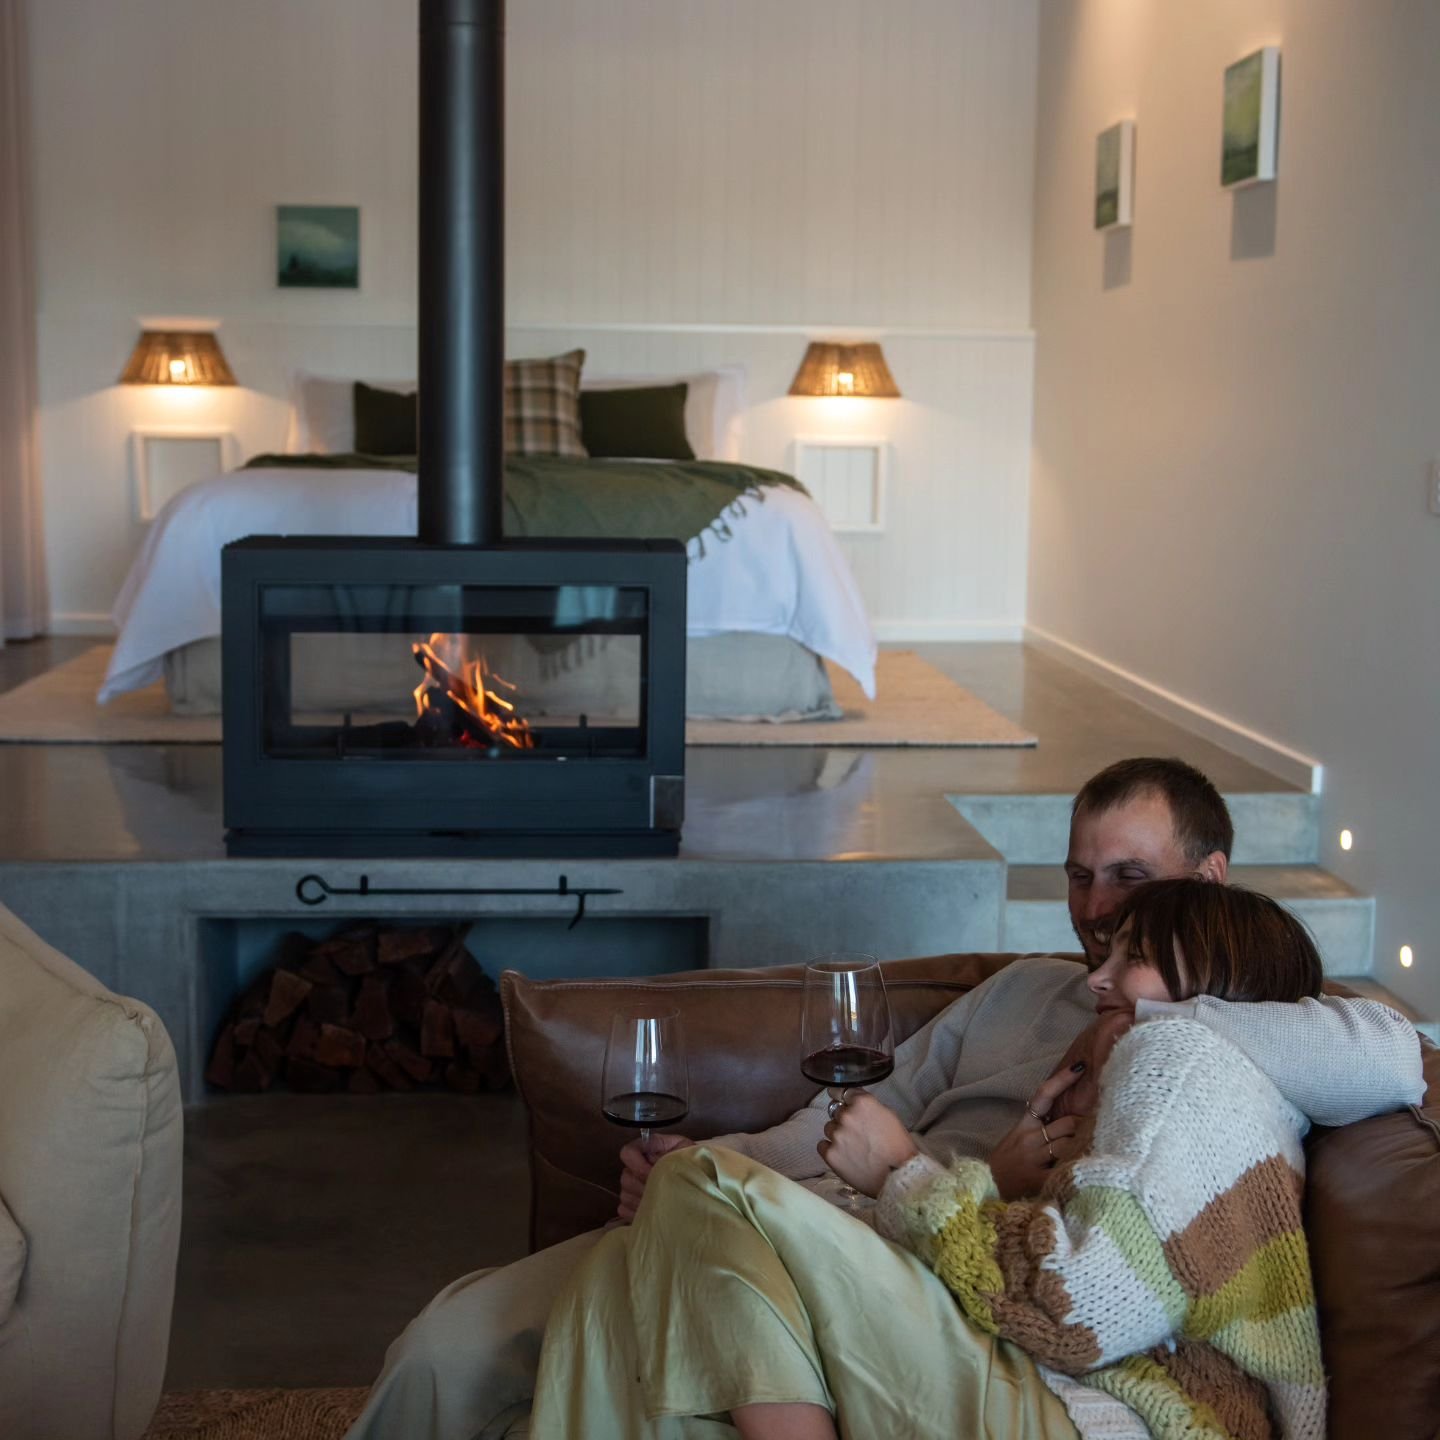 Your Margaret River winter getaway awaits at Edge Luxury Villas. Think luxury stay, red wine, double-sided wood fire, deep bath and enclosed private balcony over the lake 🍷🔥

Weekend stays filling quickly and midweek discounts available, book direc